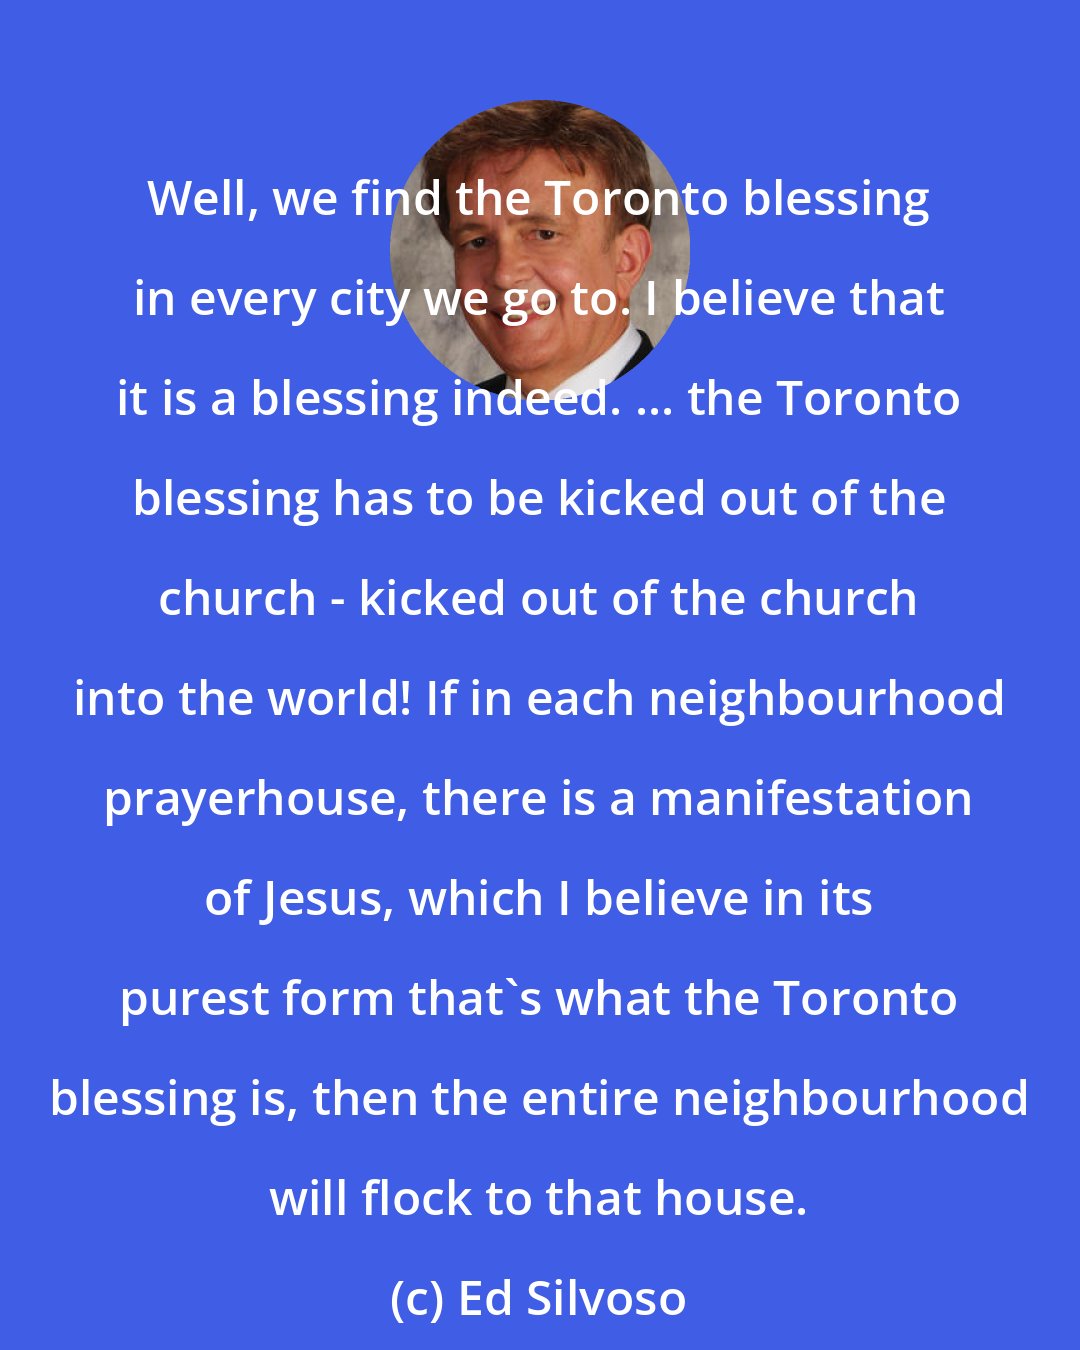 Ed Silvoso: Well, we find the Toronto blessing in every city we go to. I believe that it is a blessing indeed. ... the Toronto blessing has to be kicked out of the church - kicked out of the church into the world! If in each neighbourhood prayerhouse, there is a manifestation of Jesus, which I believe in its purest form that's what the Toronto blessing is, then the entire neighbourhood will flock to that house.